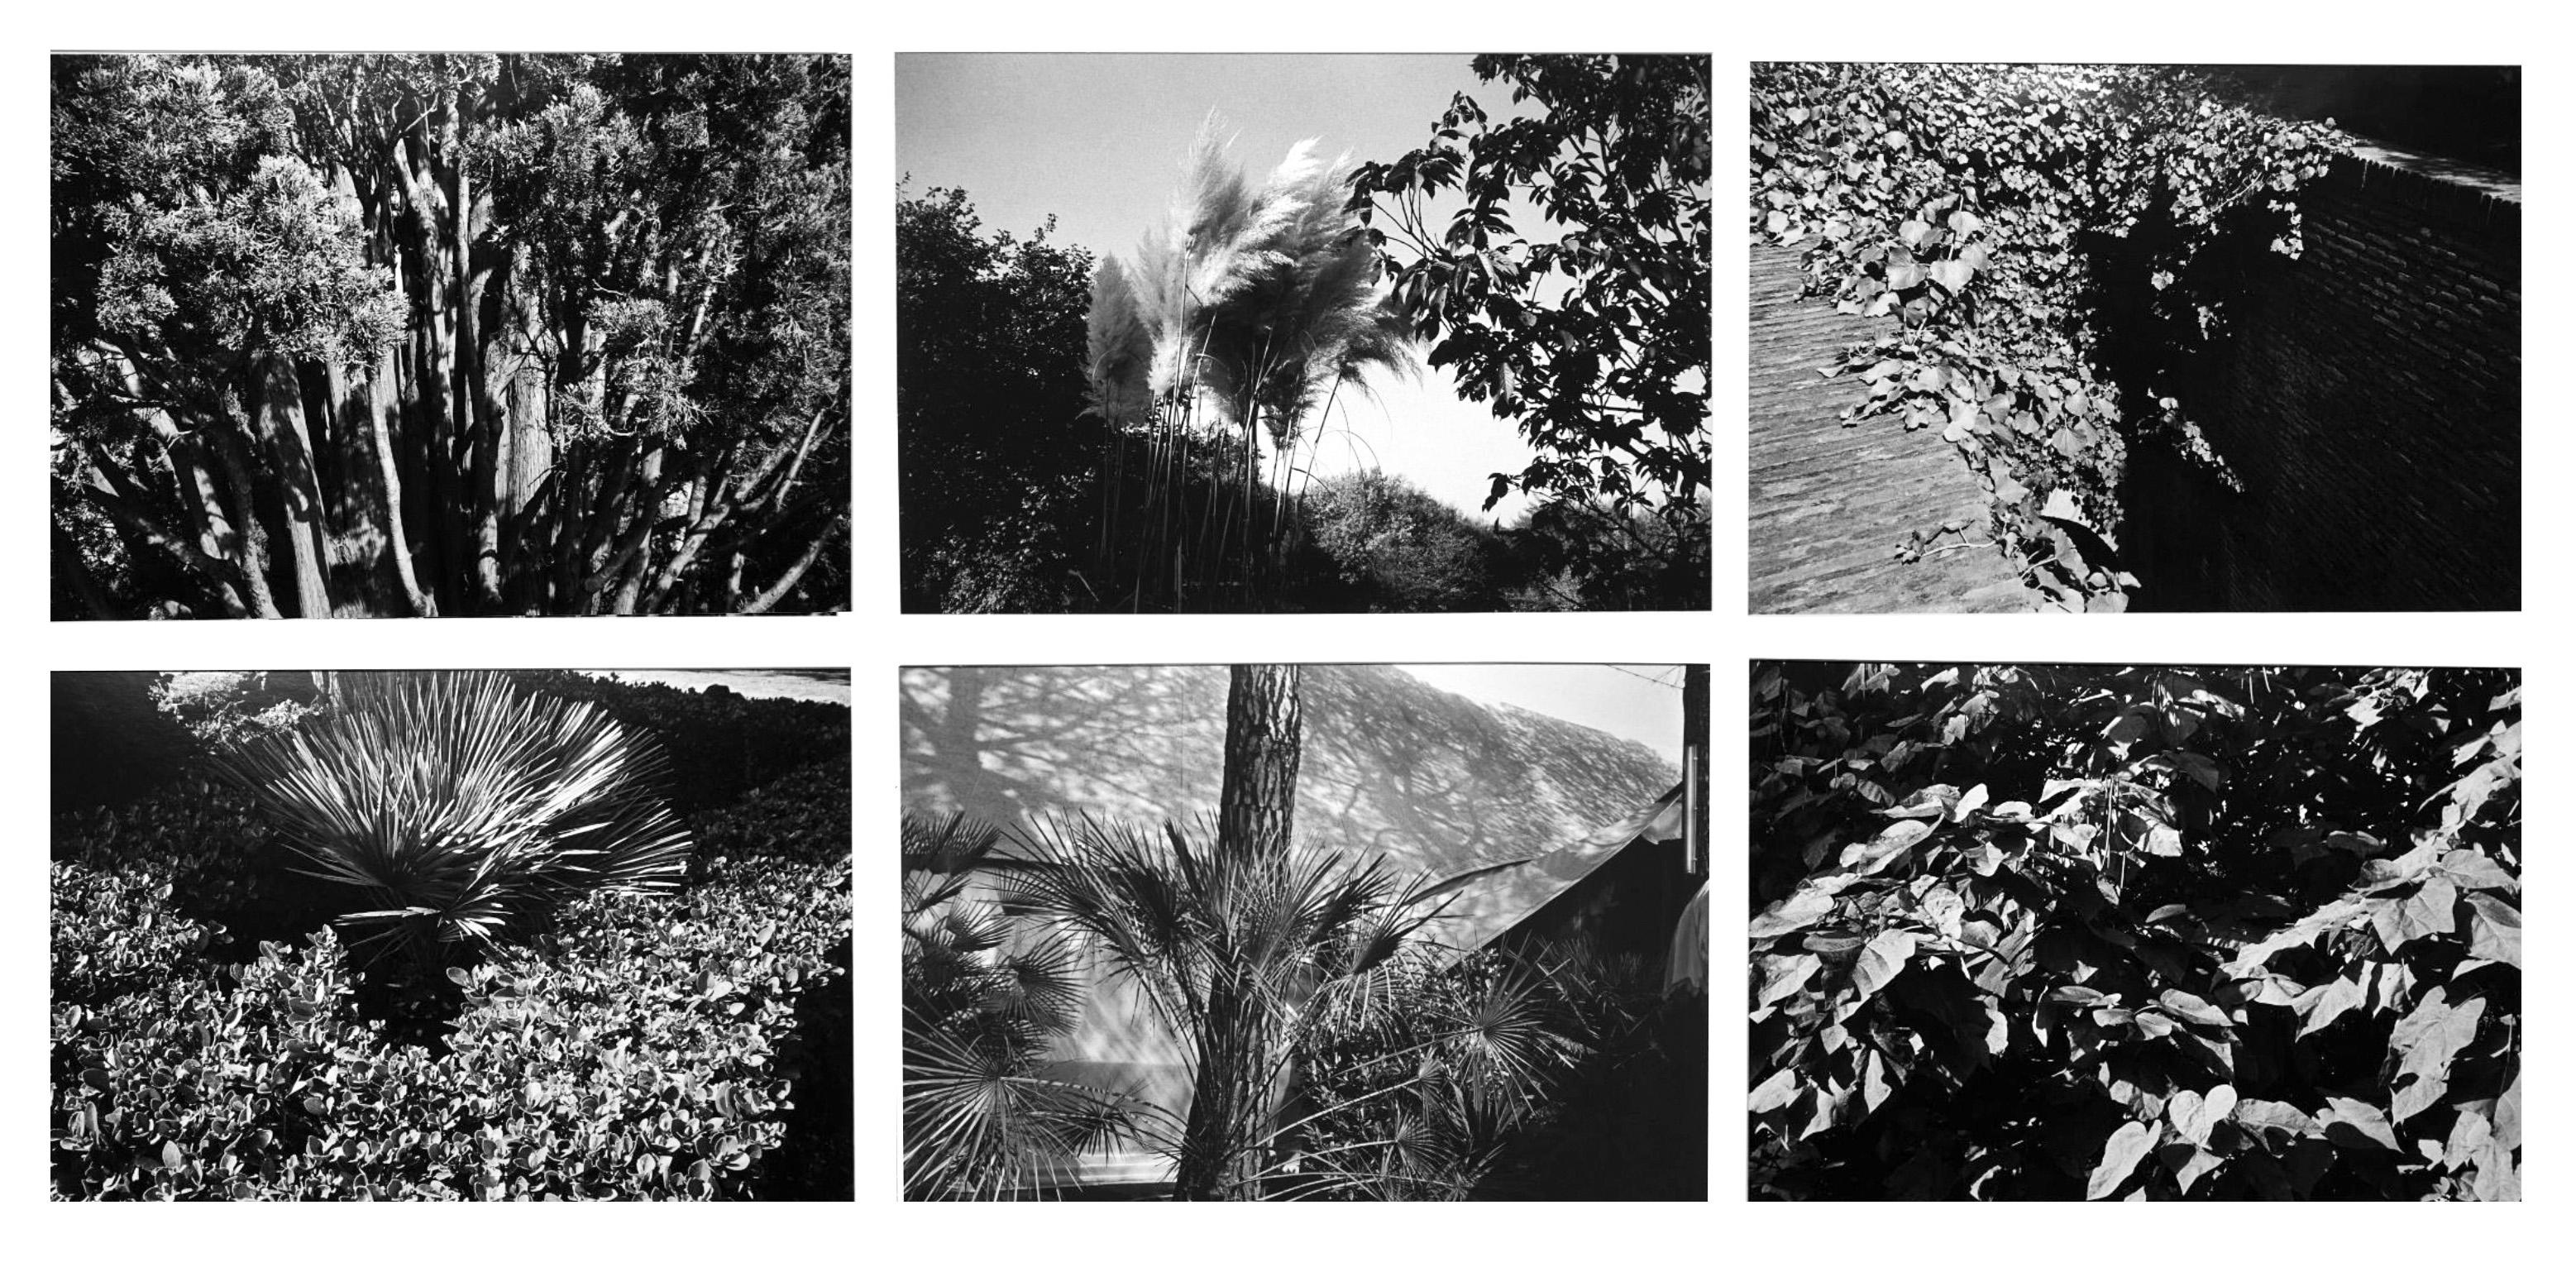 Portfolio Garden 1, 6 photos

From Germany to Portugal, from Portugal to Italy, the artist continues his research on light and its games, this time taking nature and trees as the theme. The black and white, the strong intensity of the contrasts, the